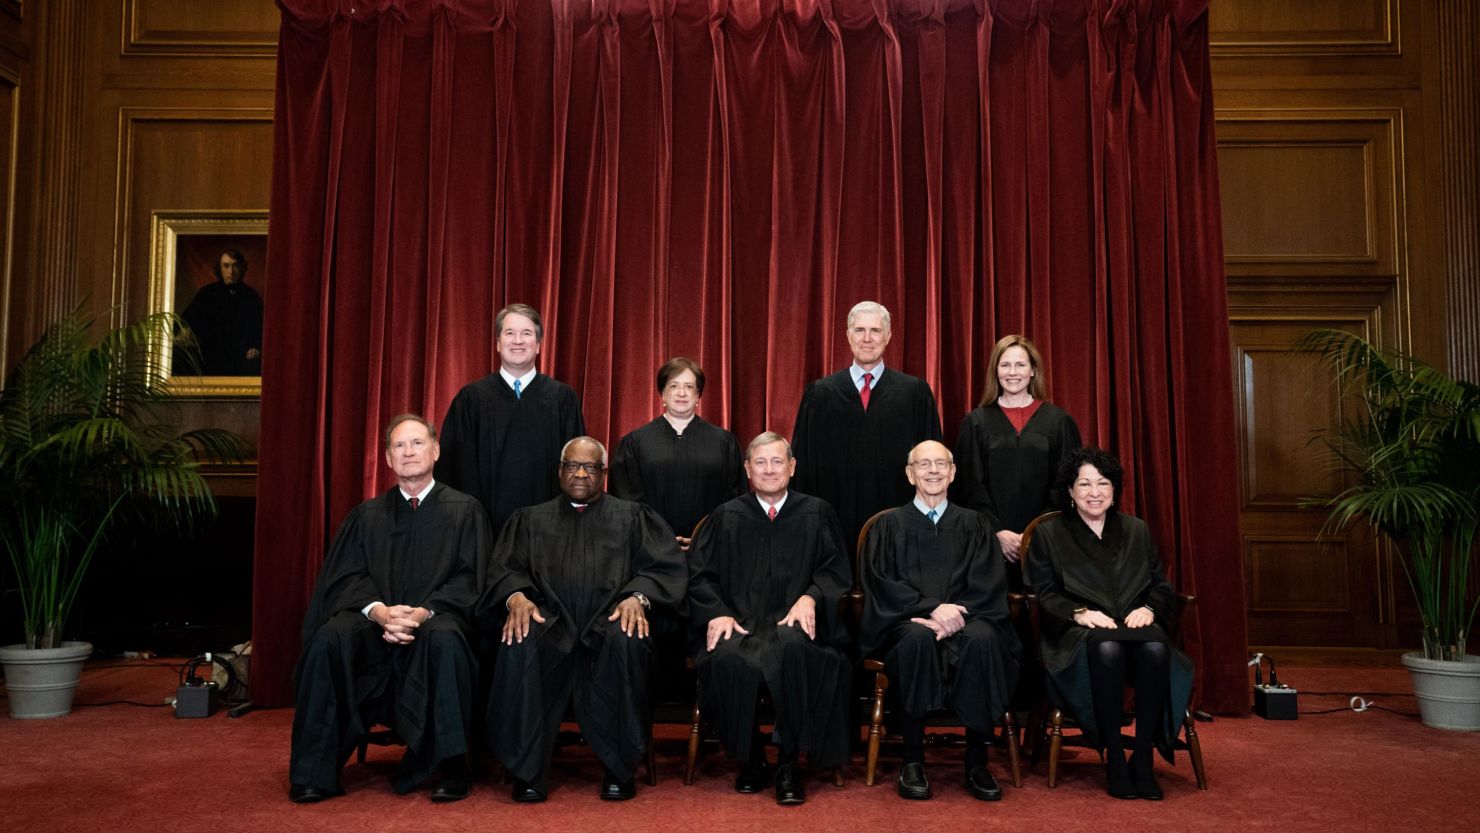 us supreme court justices group photo 04 23 2021